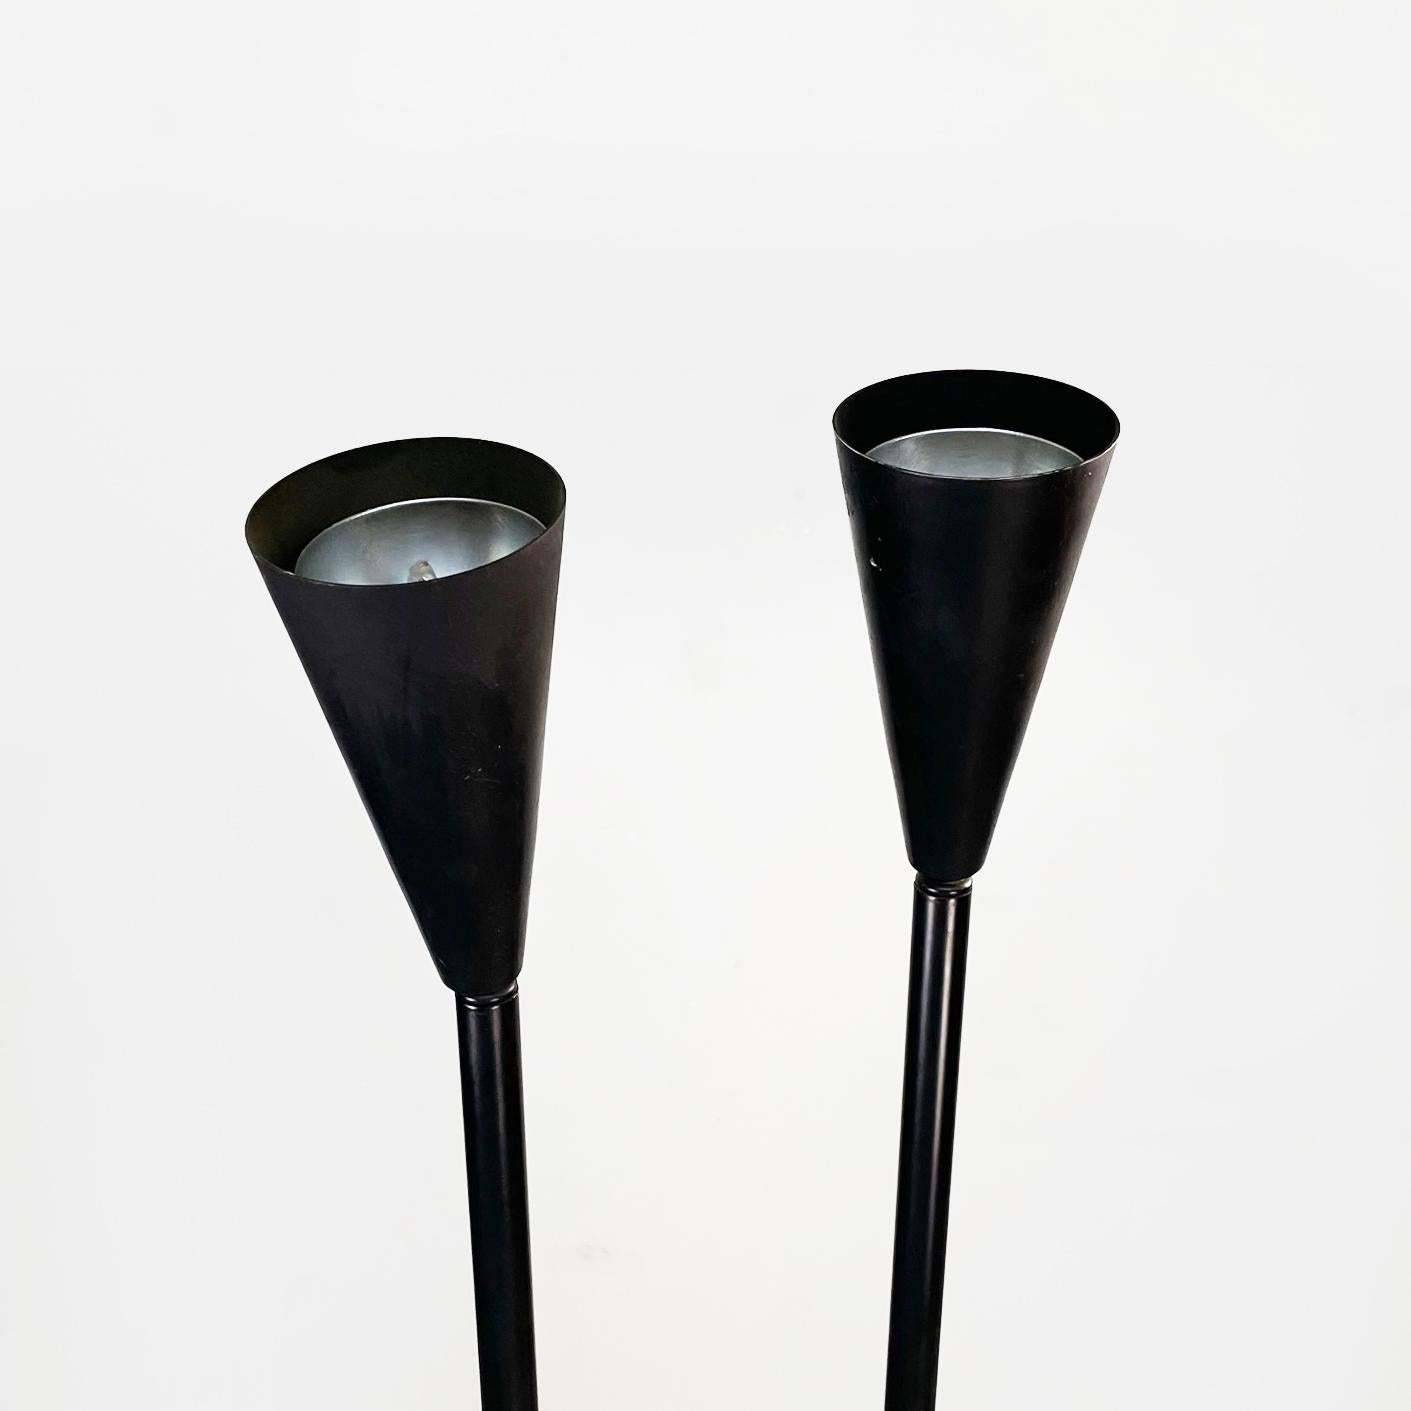 Late 20th Century Italian Modern Floor Lamp Whit Two Light Adjustable in Black Metal, 1990s For Sale